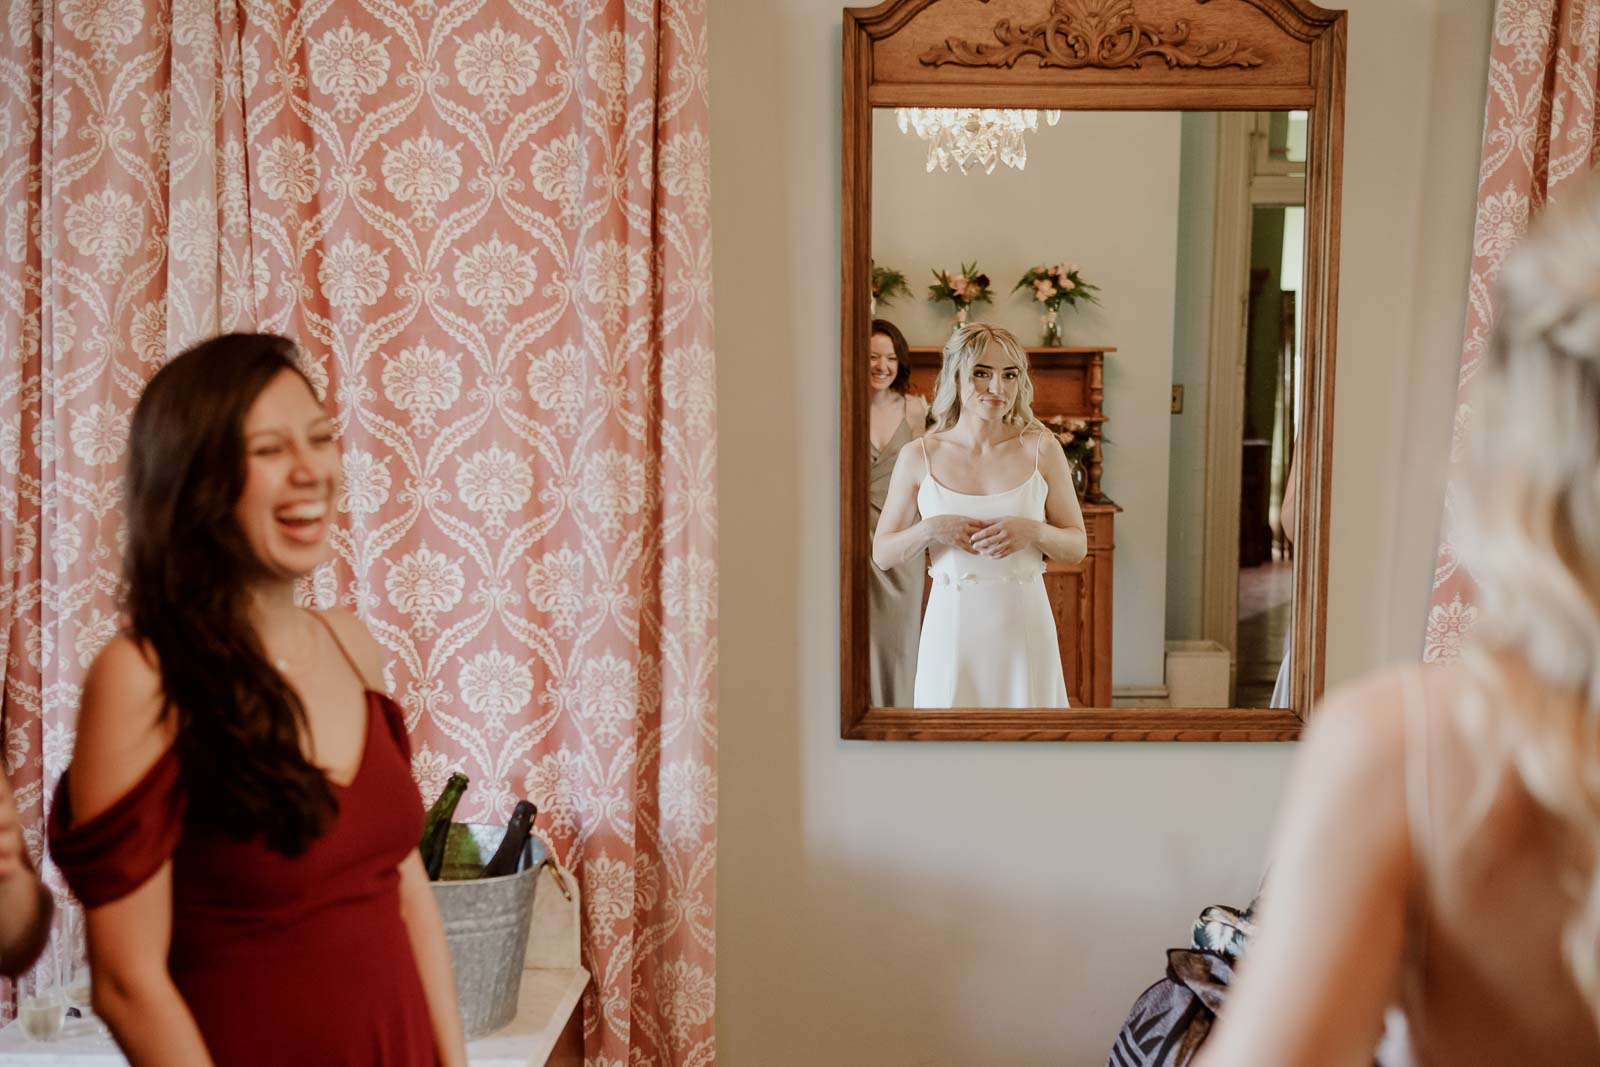 The bride look in the mirror at Barr Mansion